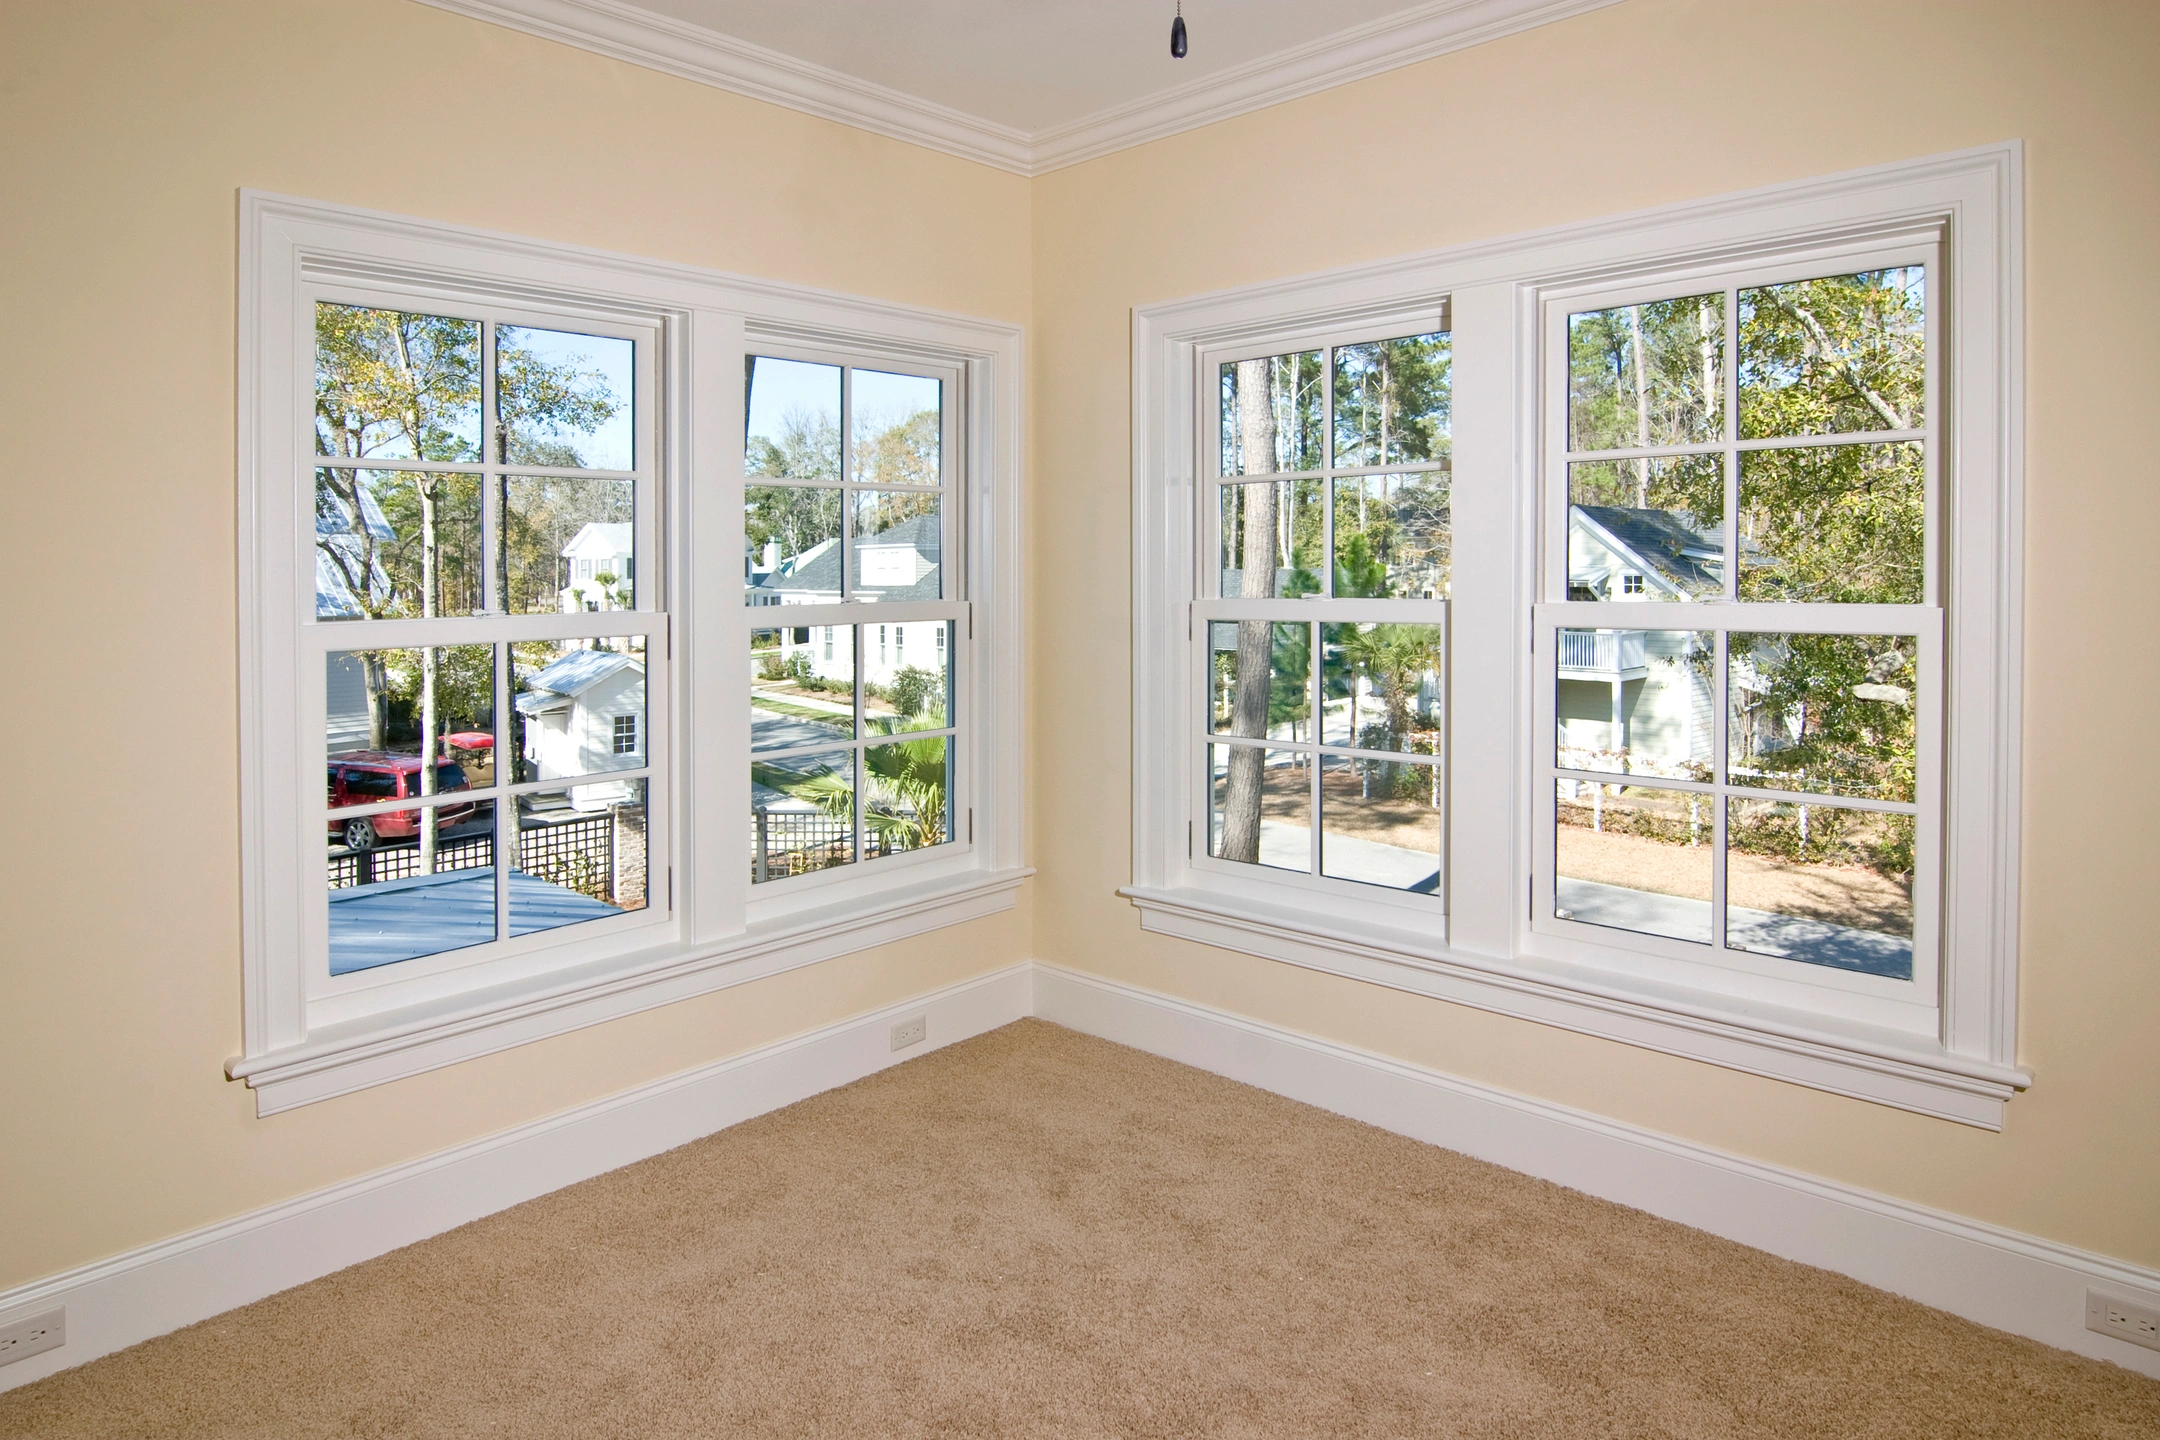 columbus window replacement with white frames on yellow walls